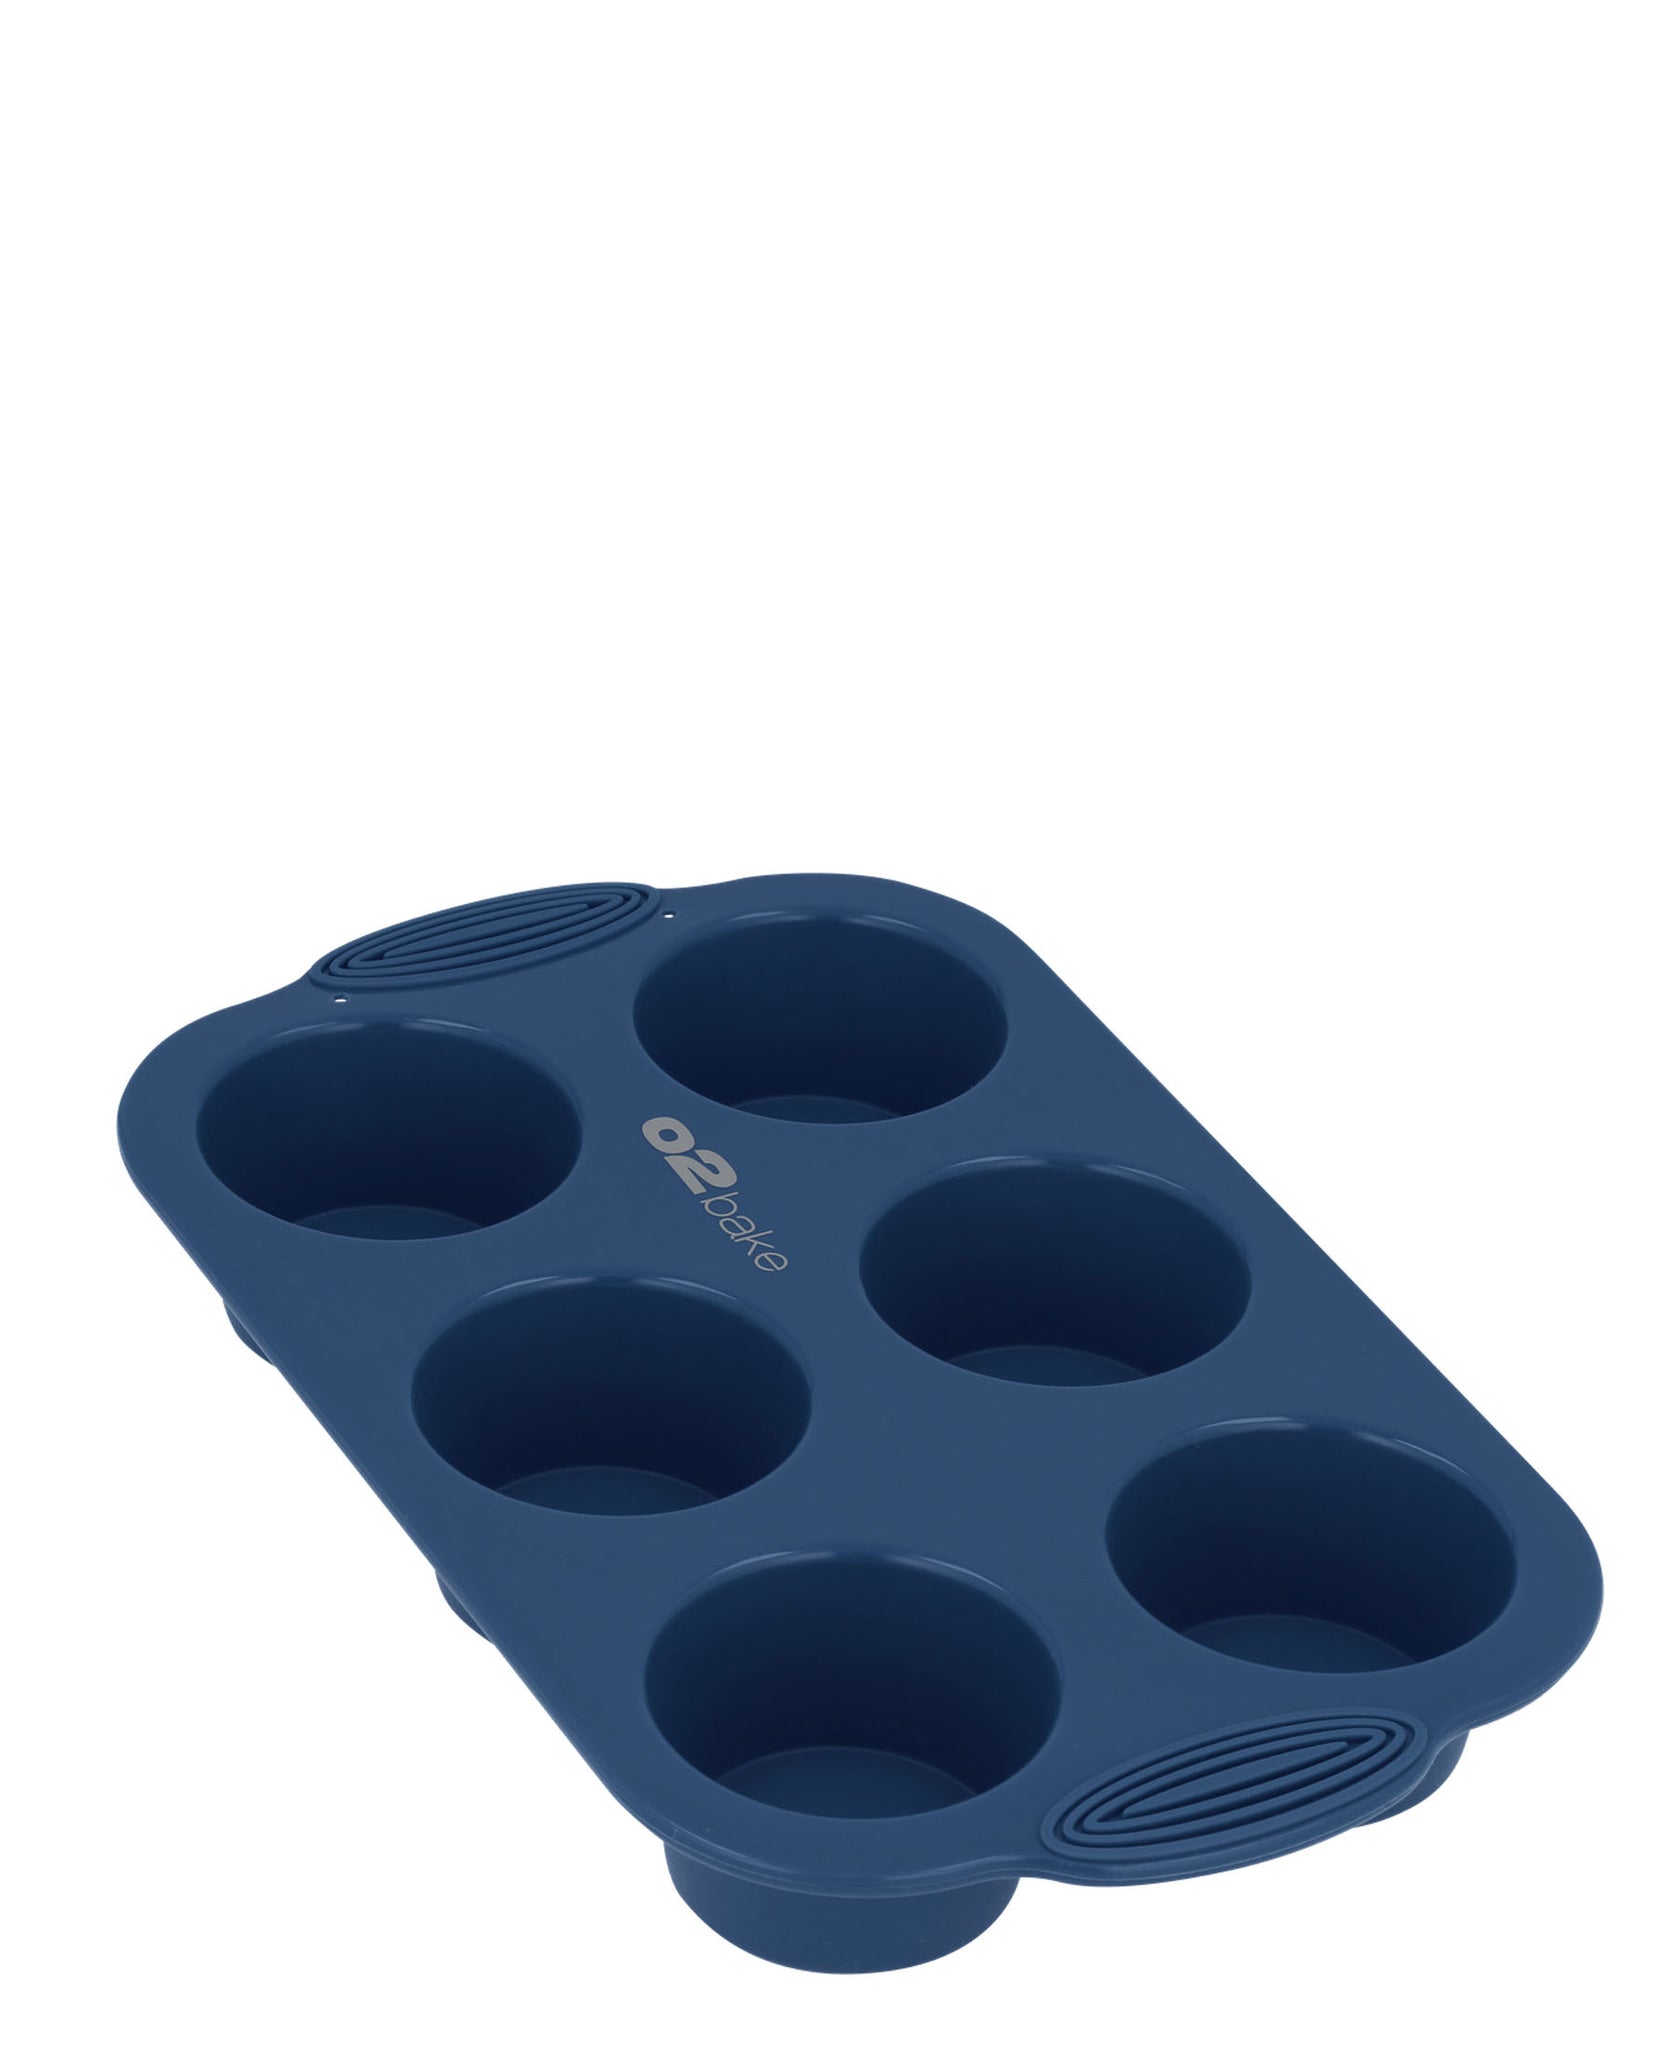 O2 Bakeware Silicone 6 Cup Muffin Pan - Blue